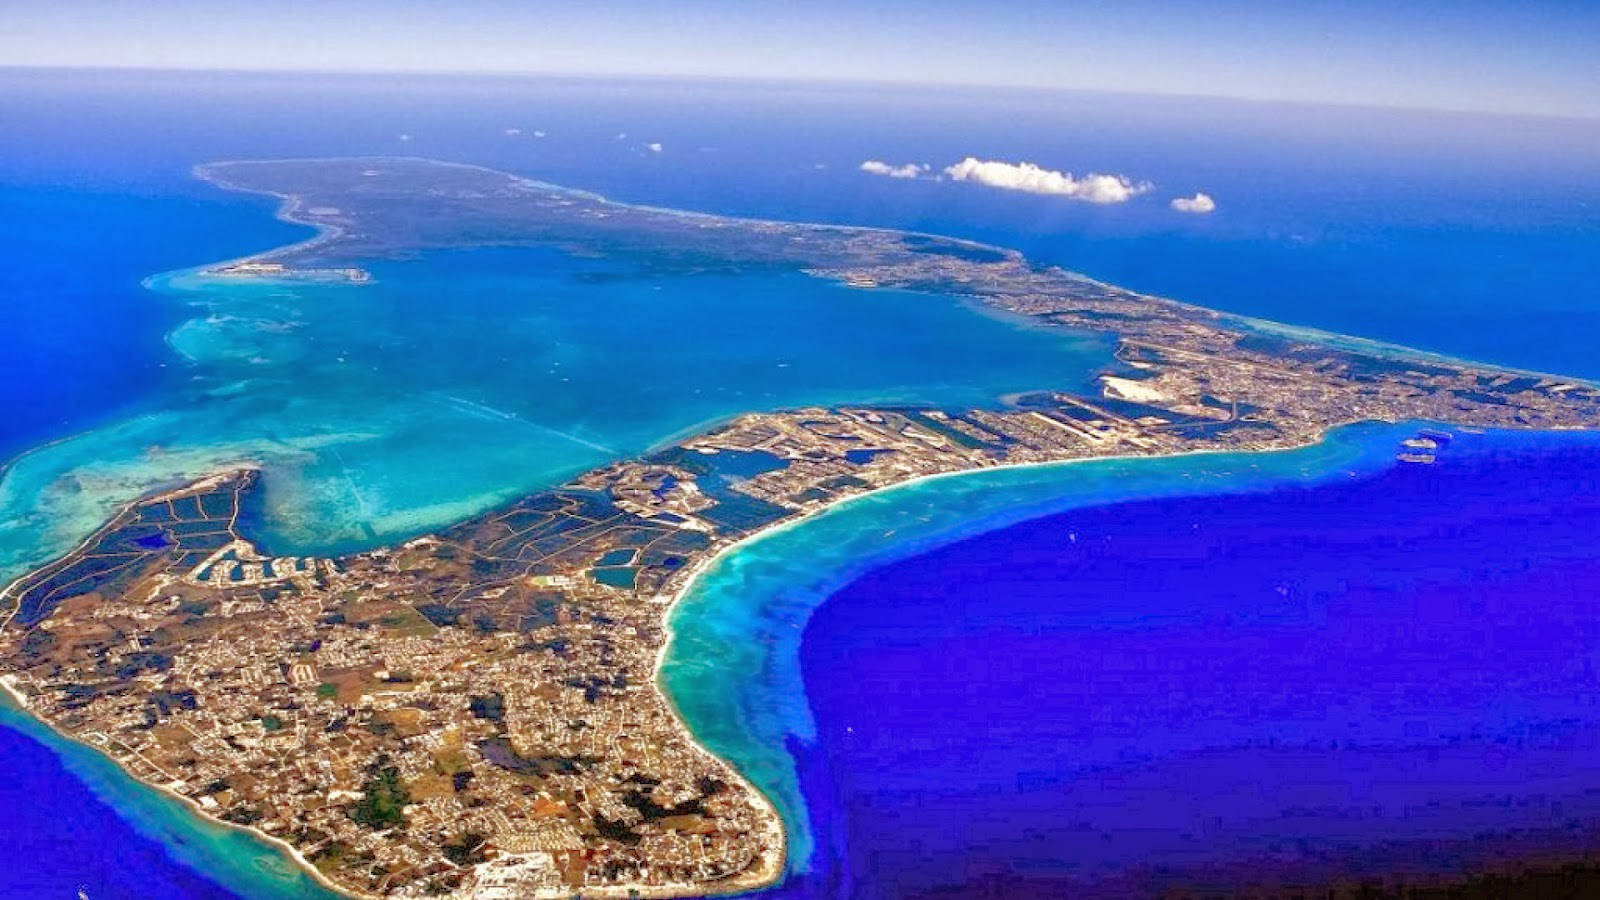 Arial View of The Cayman Islands